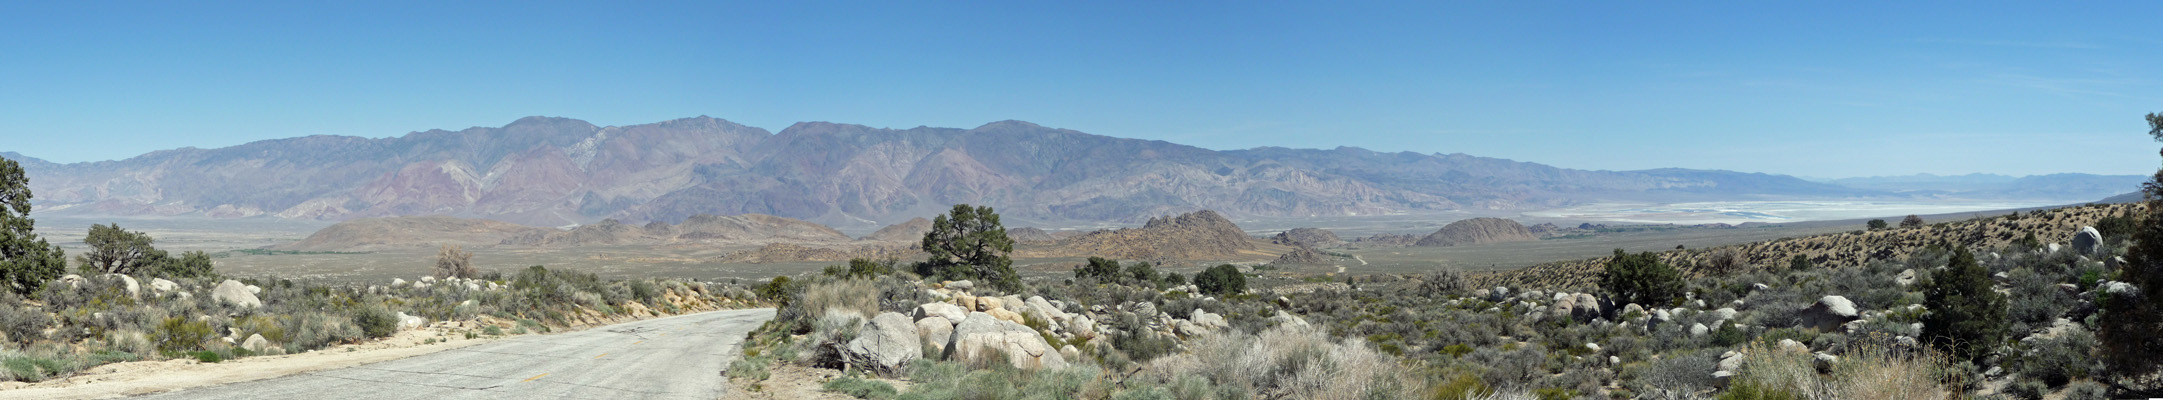 Owens Valley from Whitney Portal Road Lone Pine CA